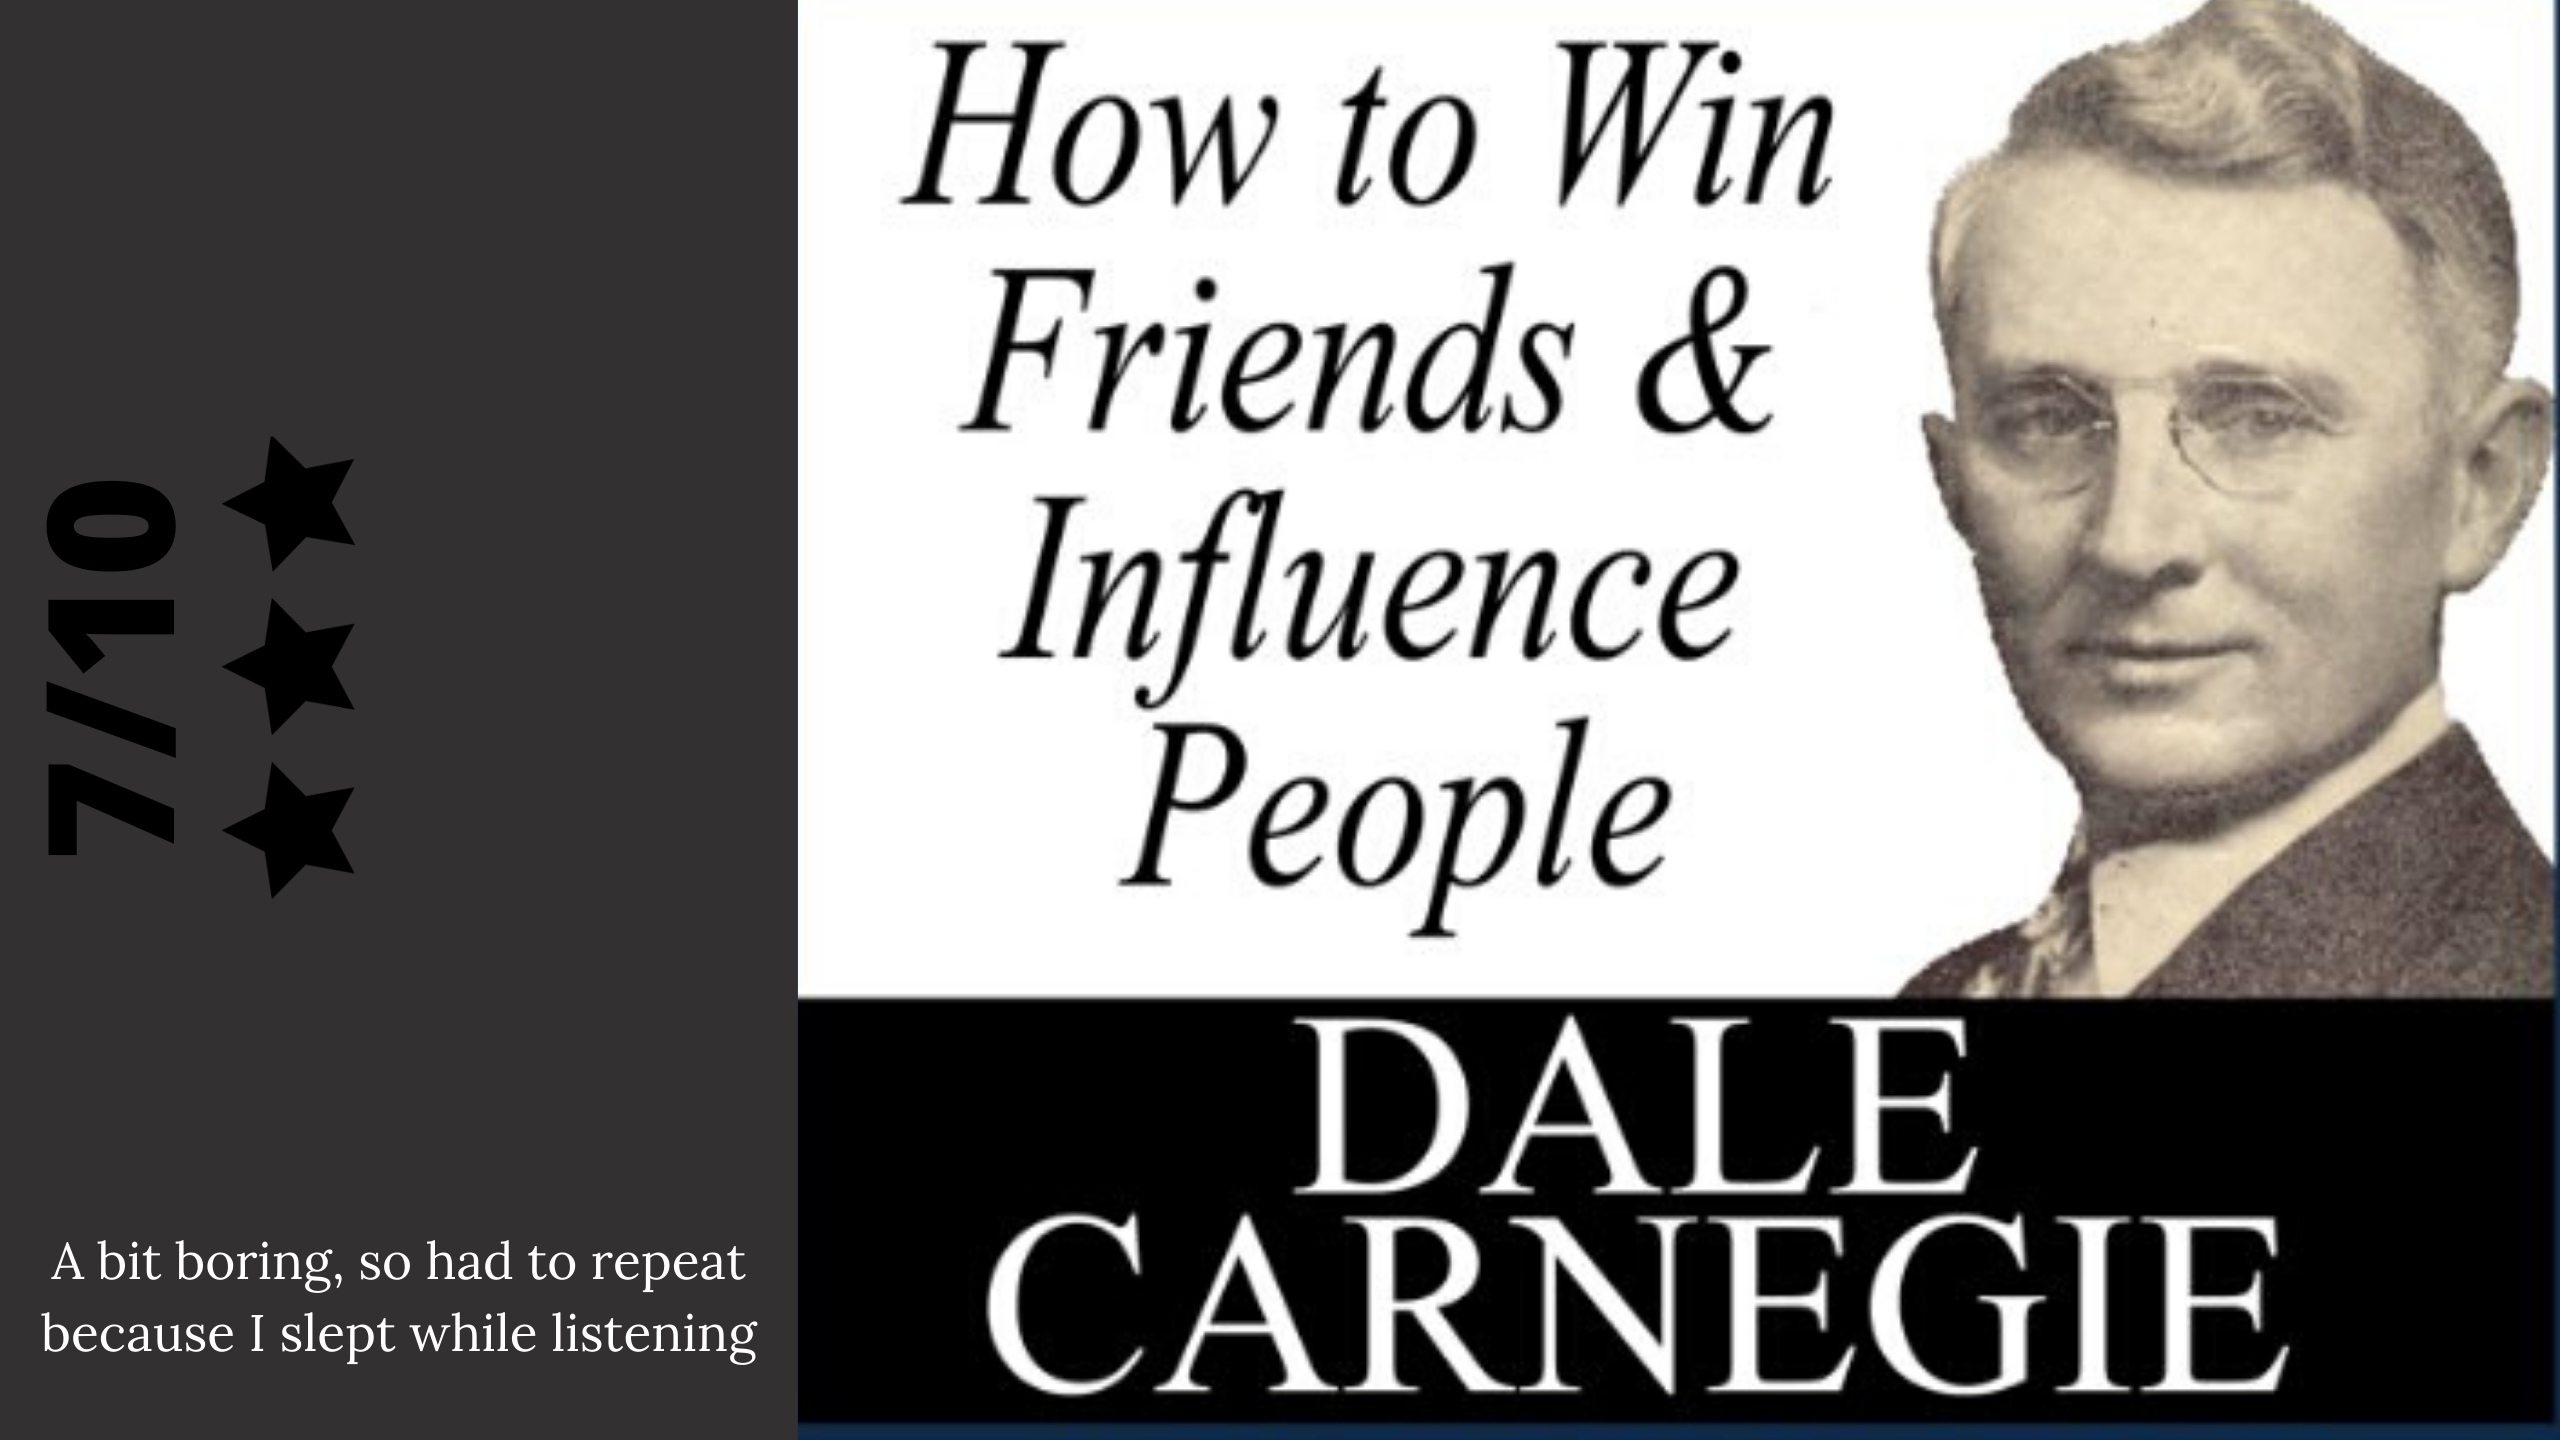 How to win friends and influence people. Dale Carnegie: win friends and influence people. Dale Carnegie books. Dale Carnegie about how to win friends.